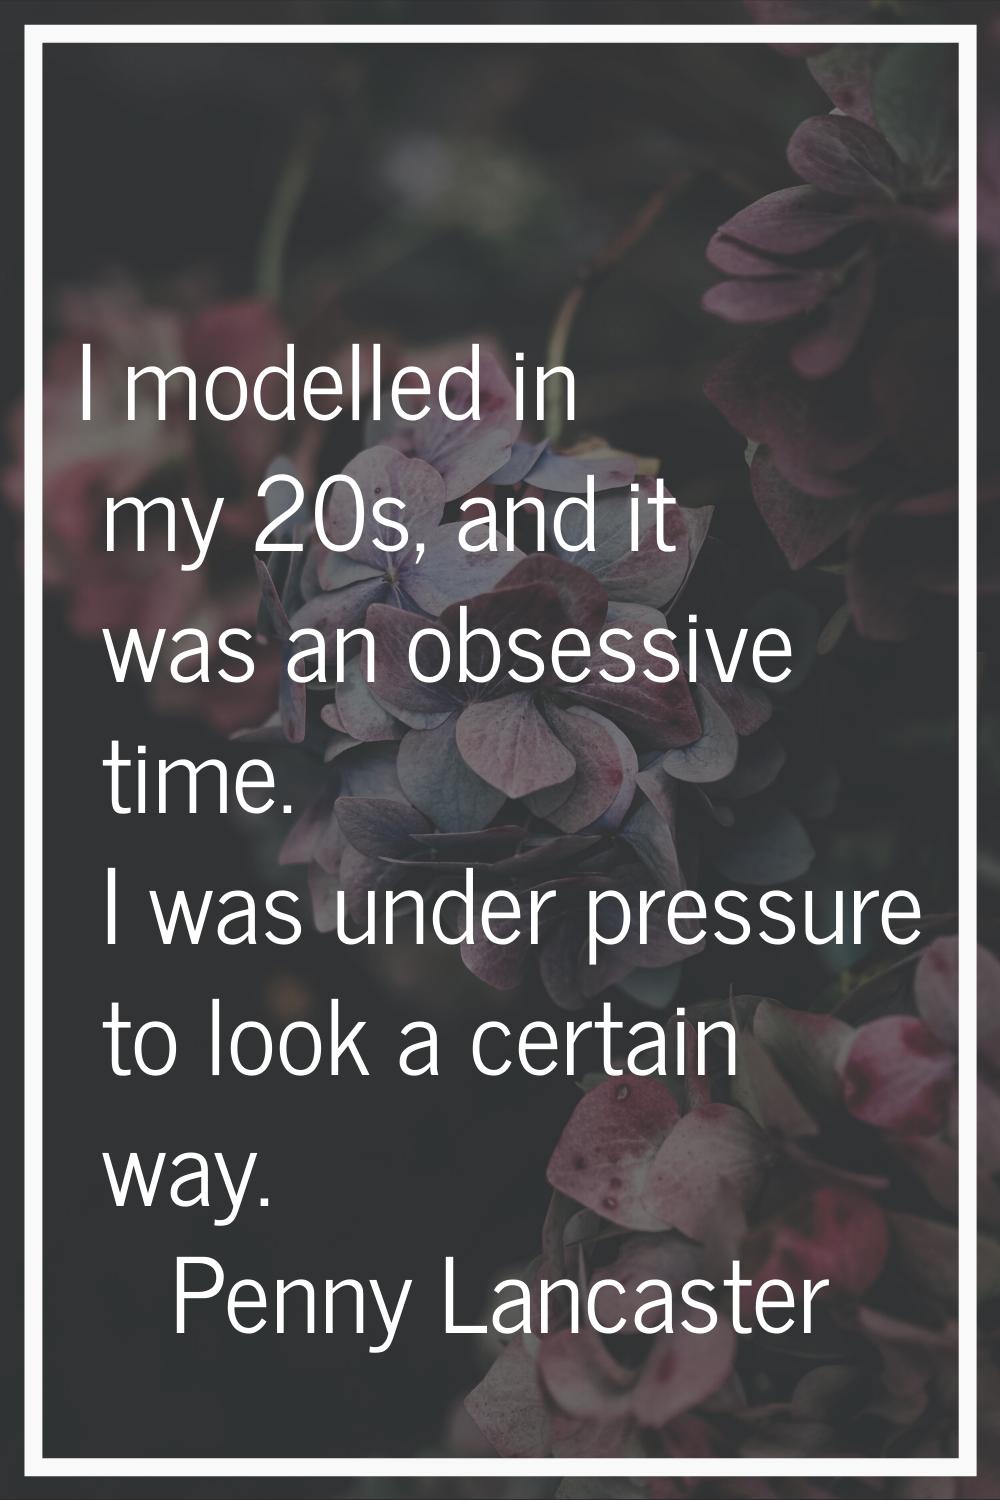 I modelled in my 20s, and it was an obsessive time. I was under pressure to look a certain way.